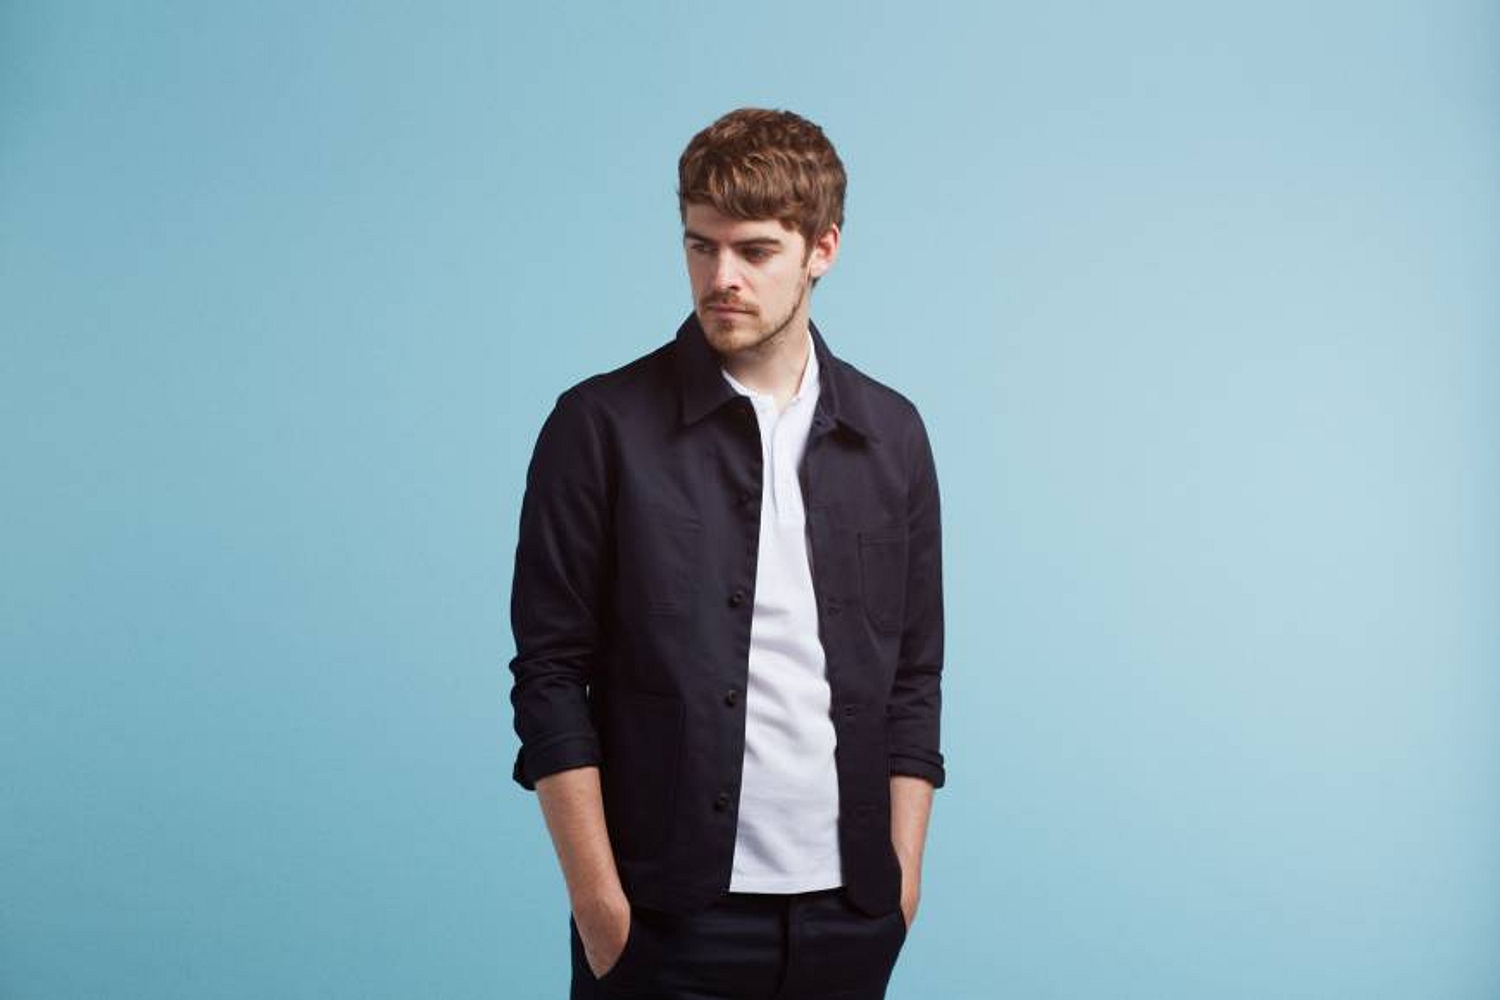 Ryan Hemsworth has remixed Skylar Spence’s ‘Can’t You See’